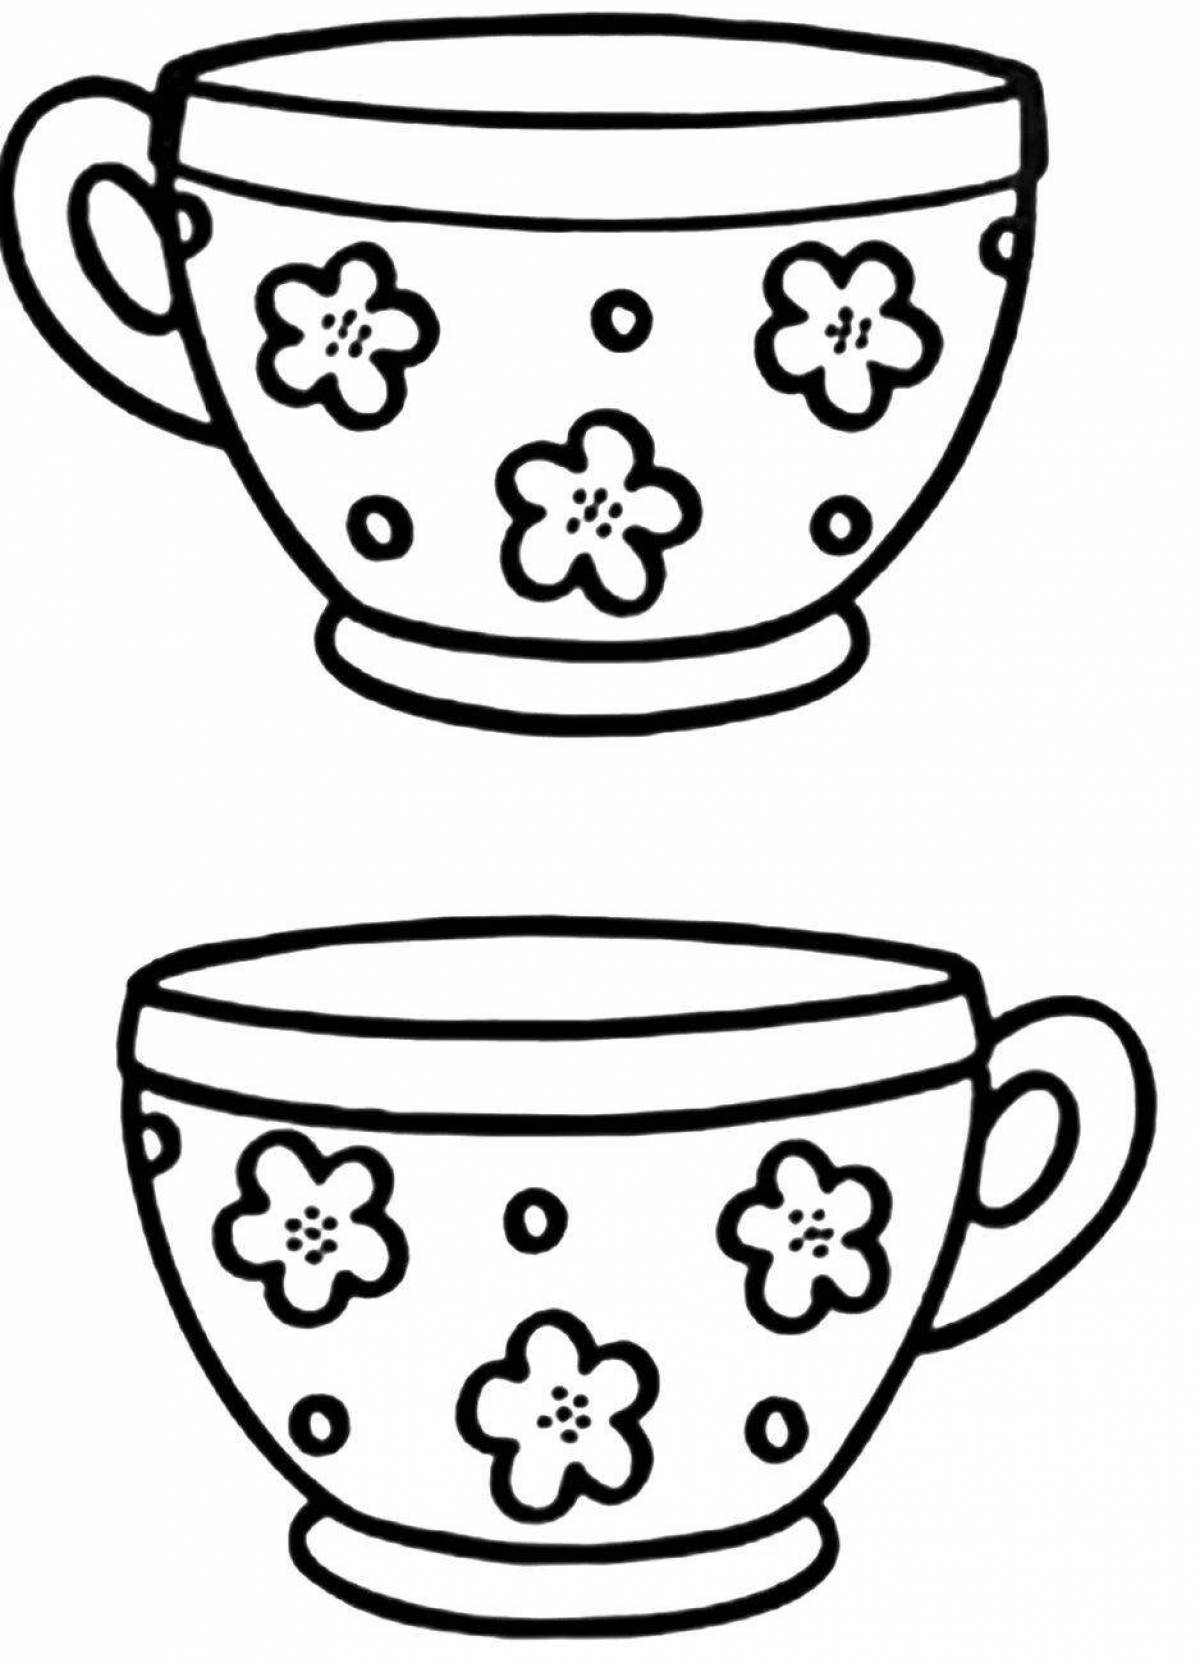 Colouring bright cup